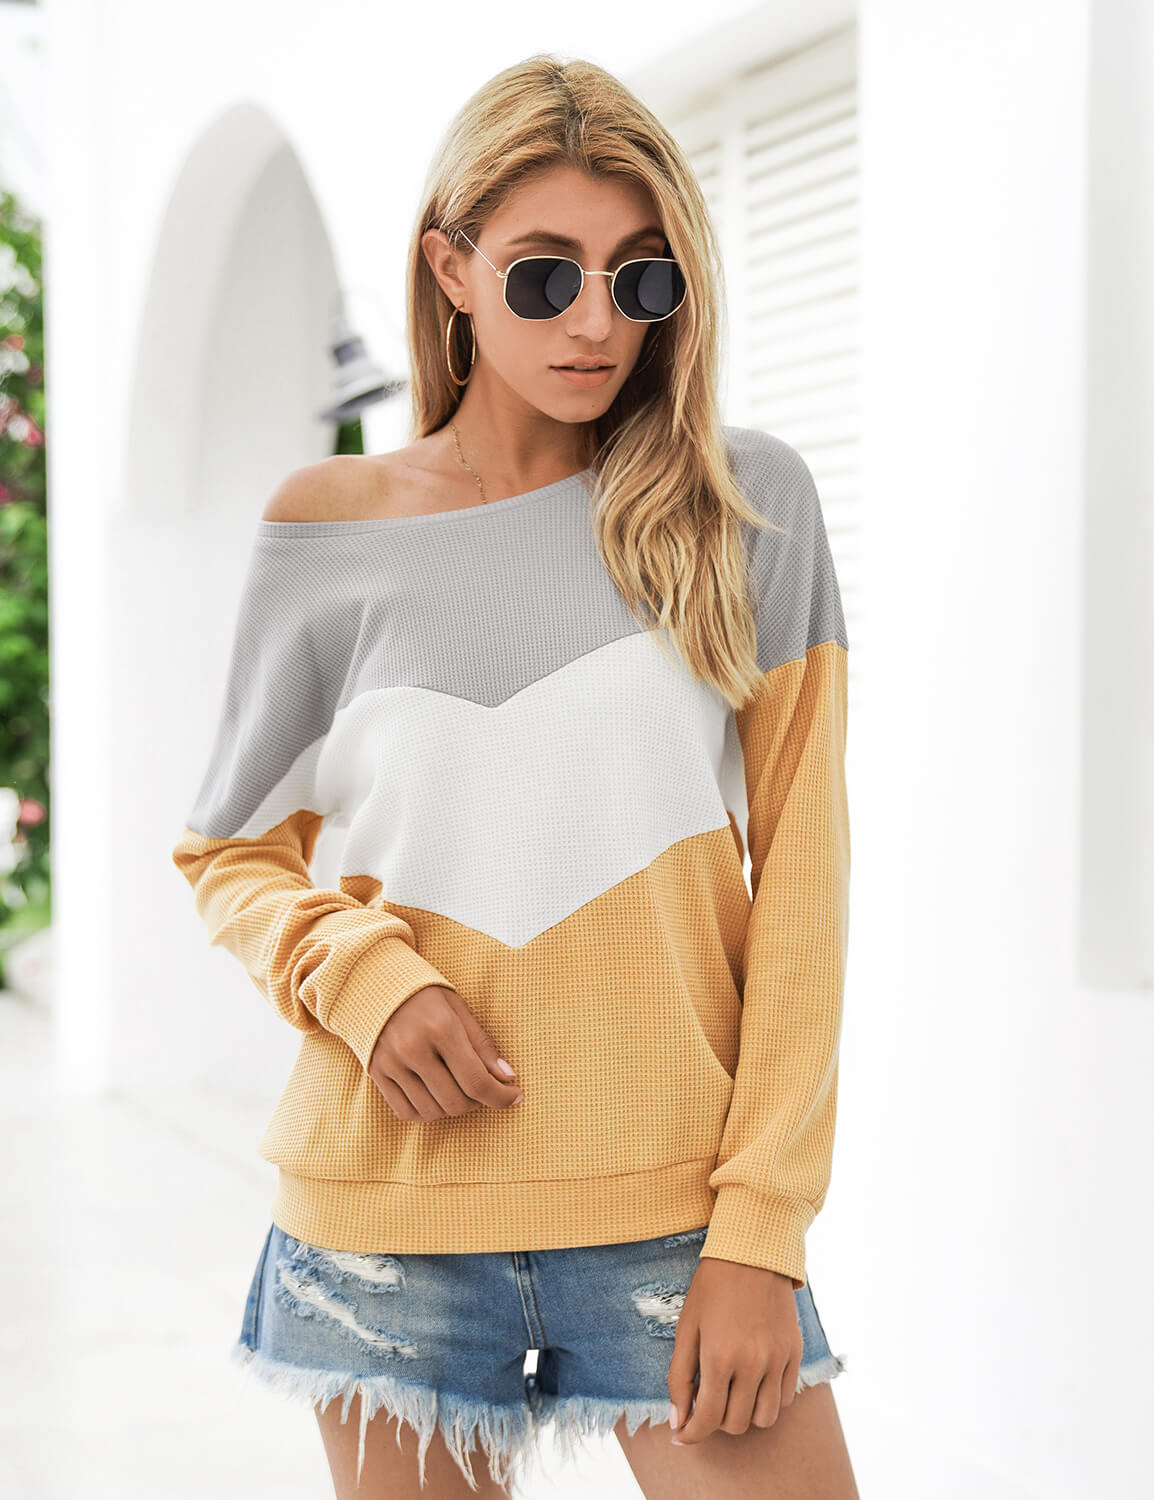 Blooming Jelly_Color Block Waffle Long Sleeve T-Shirt_Contrast Color_293053_20_Stylish Women Casual Outfits_Tops_T-Shirt